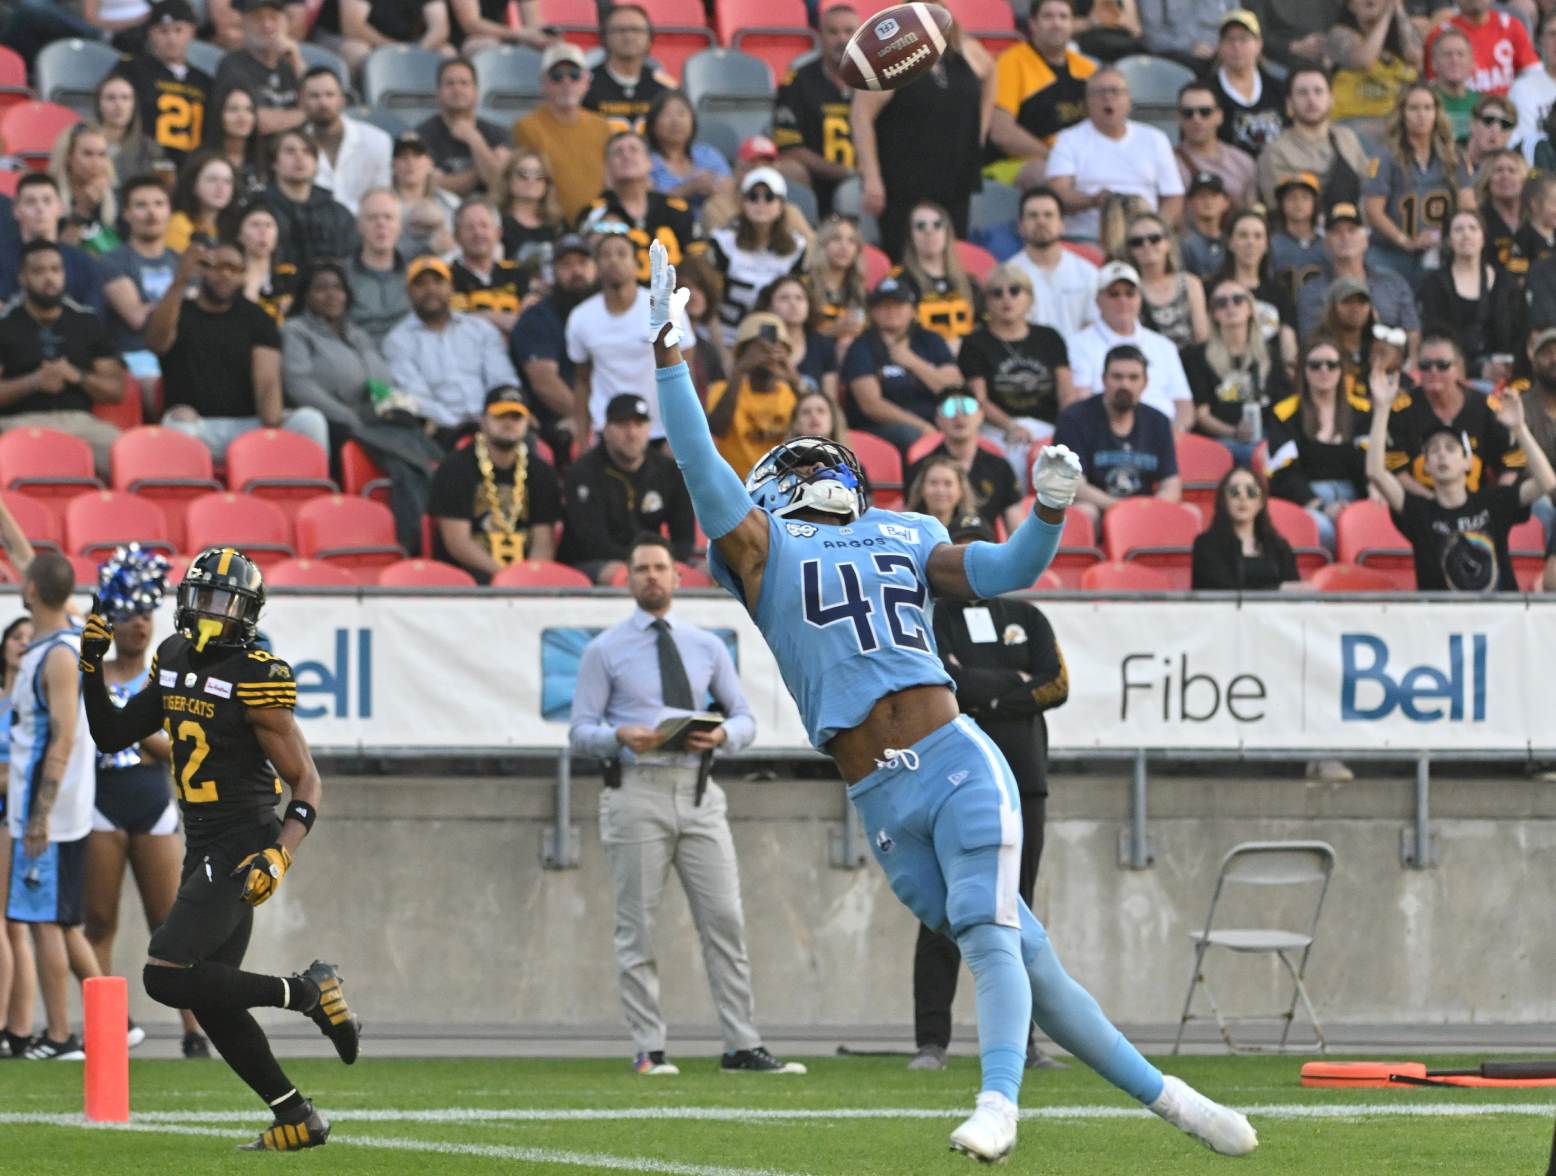 Jun 18, 2023; Toronto, Ontario, CAN; Toronto Argonauts defensive back Qwan'tez Stiggers (42) reaches up to intercept a pass intended for Hamilton Tiger-Cats wide receiver Tim White (12) in the first quarter at BMO Field. Credit: Dan Hamilton-USA TODAY Sports